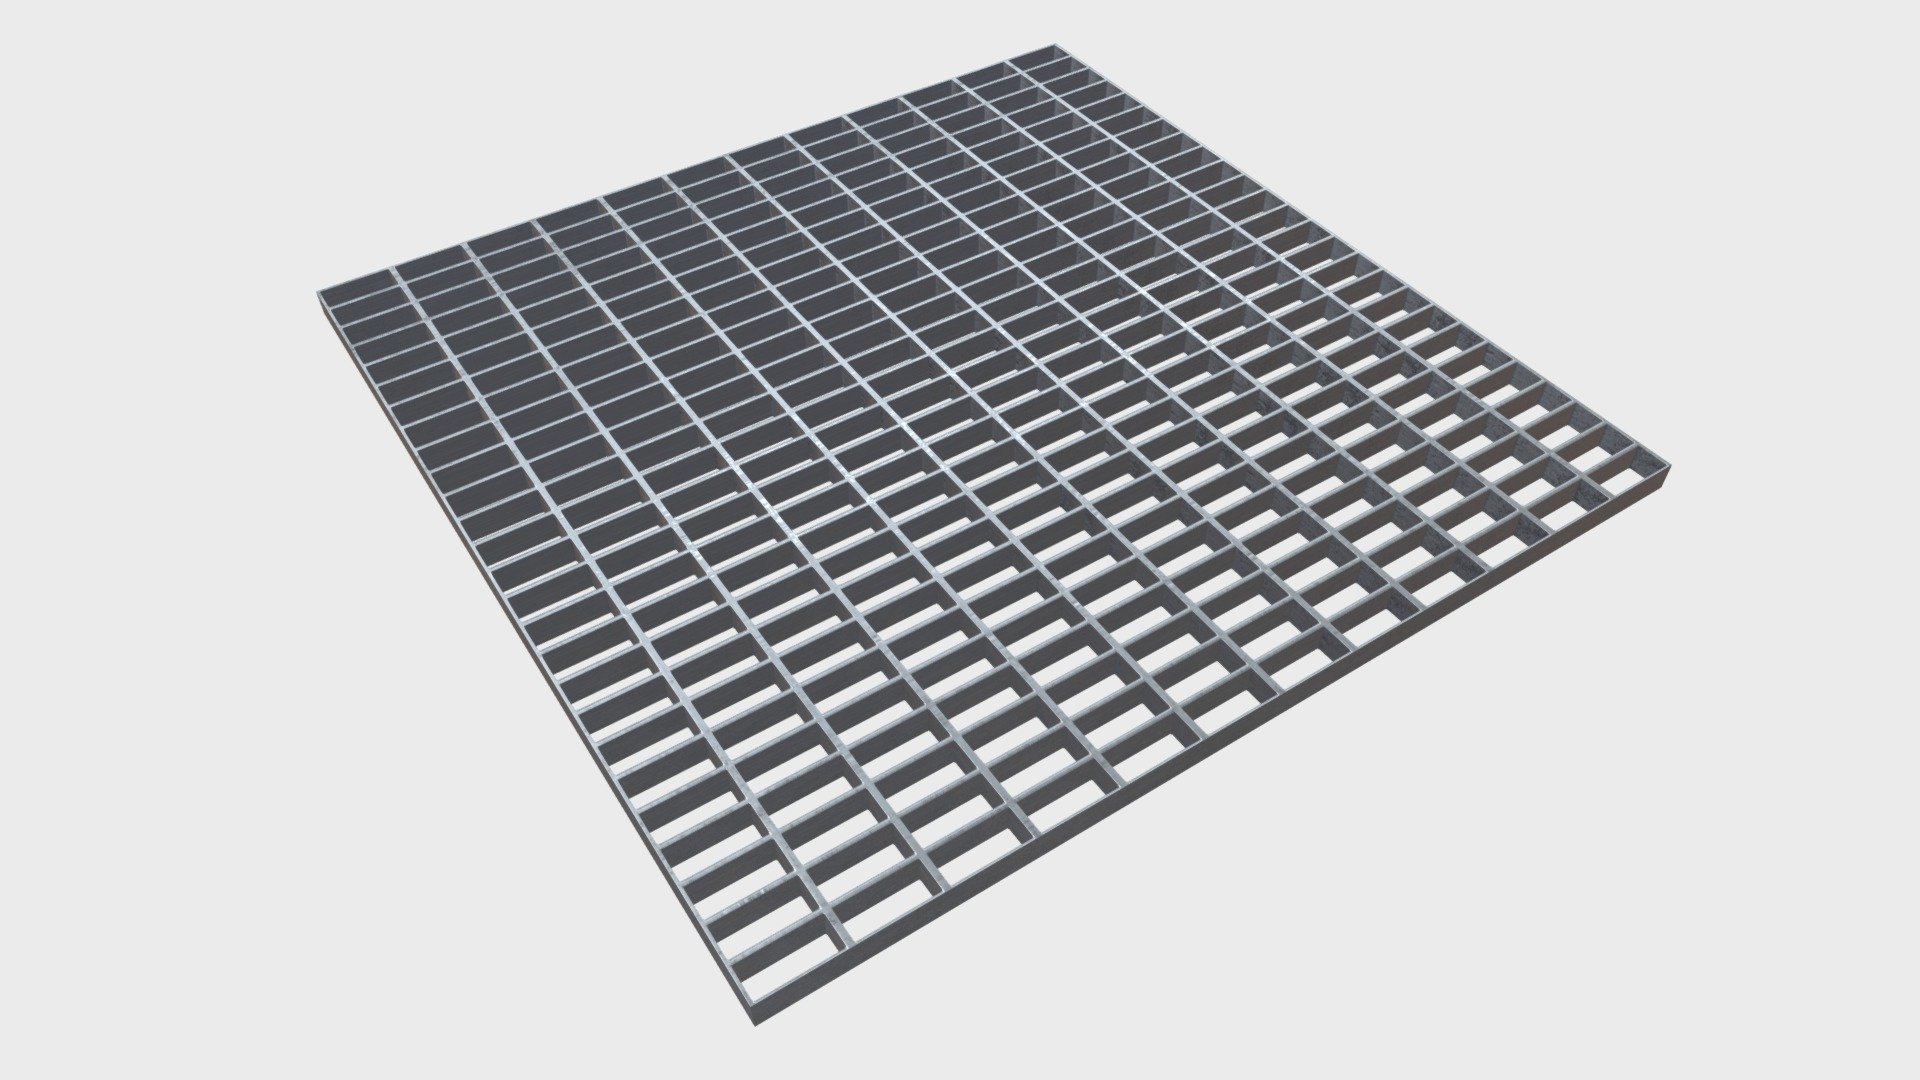 === The following description refers to the additional ZIP package provided with this model ===

Open mesh steel grating flooring modular 3D Model. Production-ready 3D Model, with PBR materials, textures, non overlapping UV Layout map provided in the package.

Quads only geometries (no tris/ngons).

Formats included: FBX, OBJ; scenes: BLEND (with Cycles / Eevee materials); other: png with Alpha.

1 Object (mesh), 1 PBR Material, UV unwrapped (non overlapping UV Layout map provided in the package); UV-mapped Textures.

UV Layout maps and Image Textures resolutions: 2048x2048; PBR Textures made with Substance Painter.

Polygonal, QUADS ONLY (no tris/ngons); 91470 vertices, 92092 quad faces (184184 tris).

Real world dimensions; scene scale units: cm in Blender (that is: Metric with 0.01 scale).

Uniform scale object (scale applied in Blender) 3d model